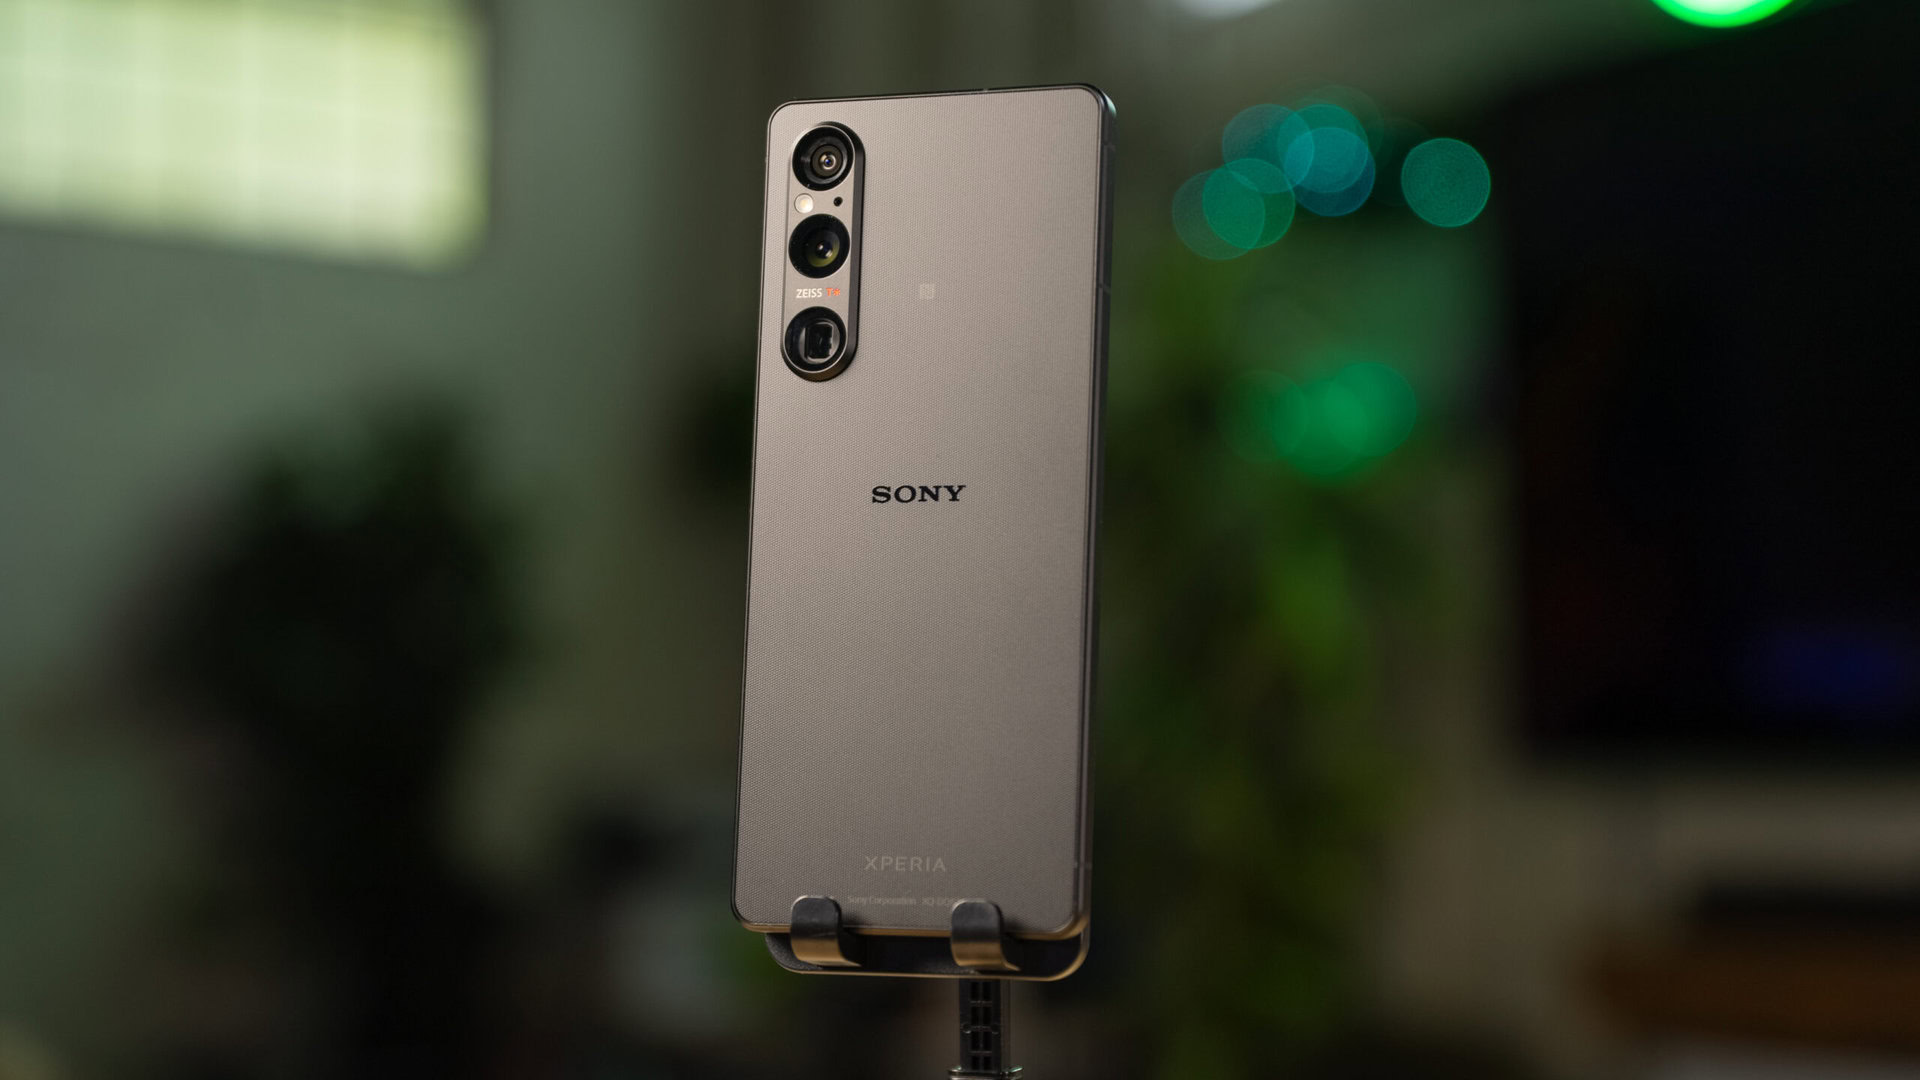 Sony Xperia 1 V: Specs, pricing, availability, and more